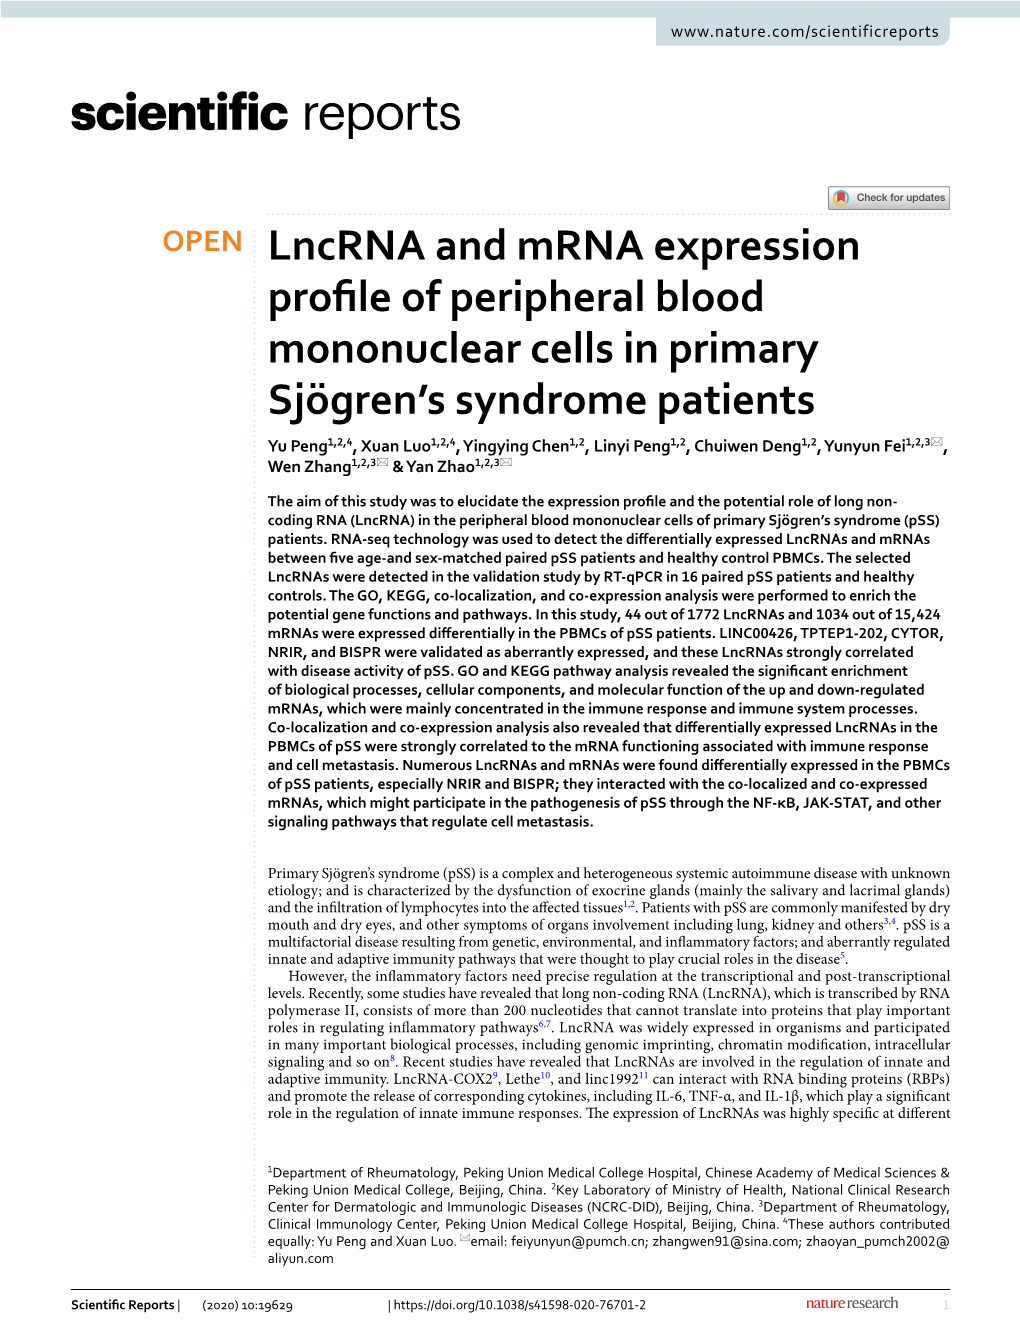 Lncrna and Mrna Expression Profile of Peripheral Blood Mononuclear